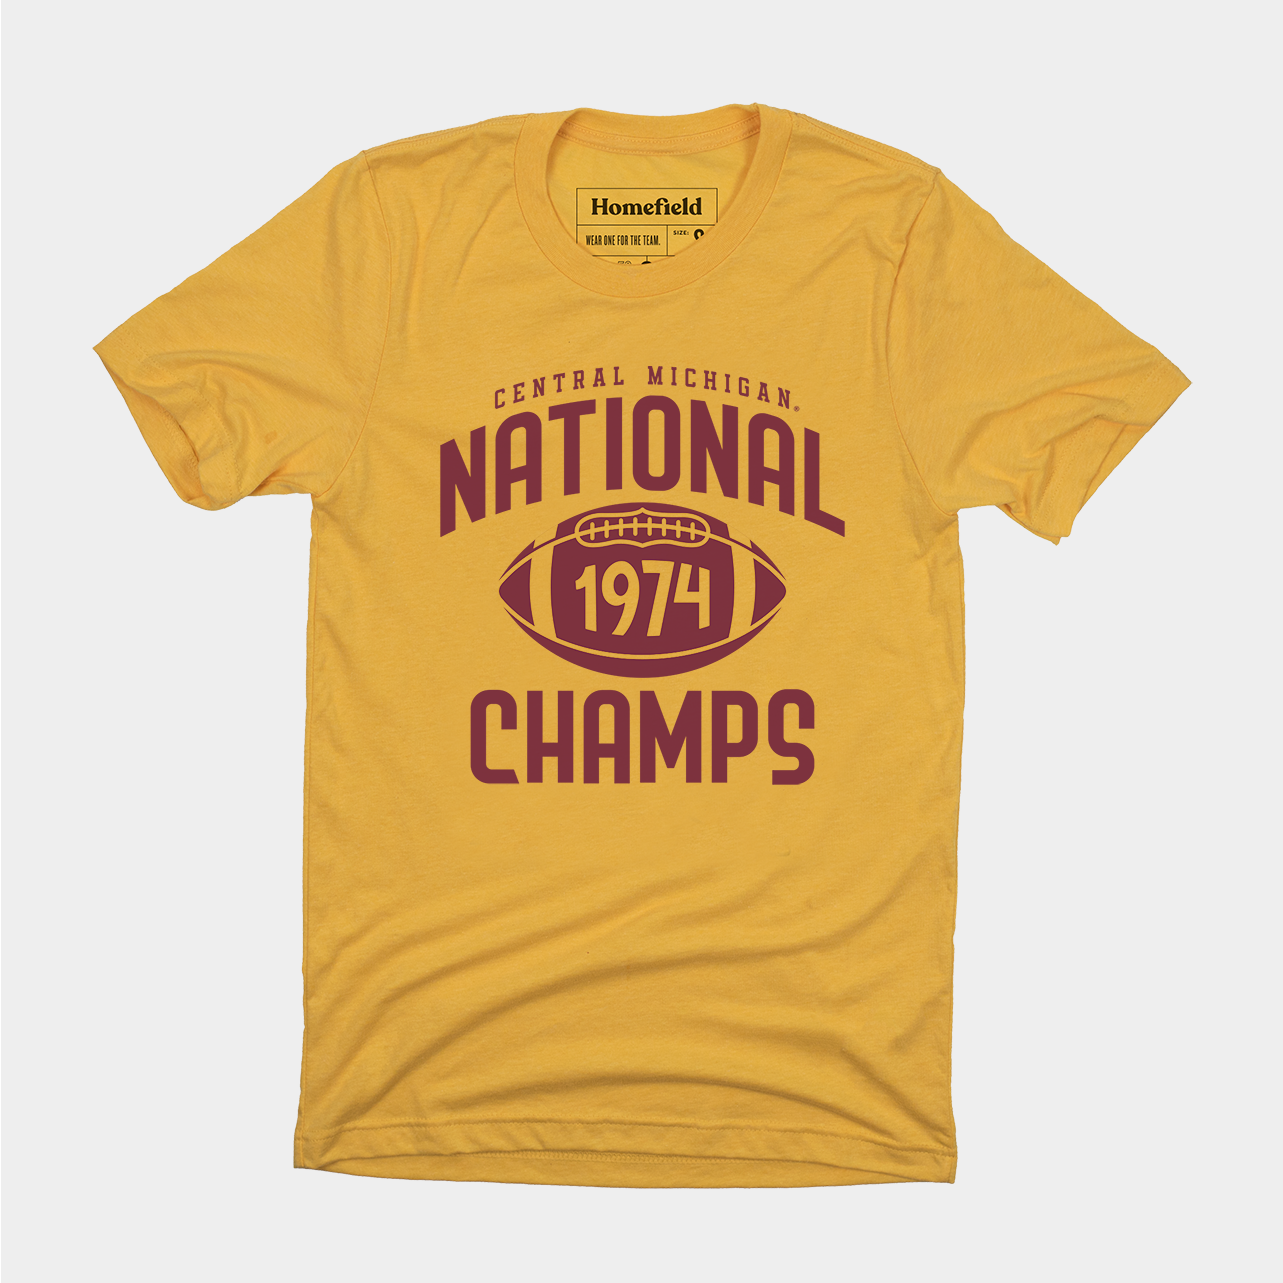 Central Michigan Football “1974 National Champs” Tee